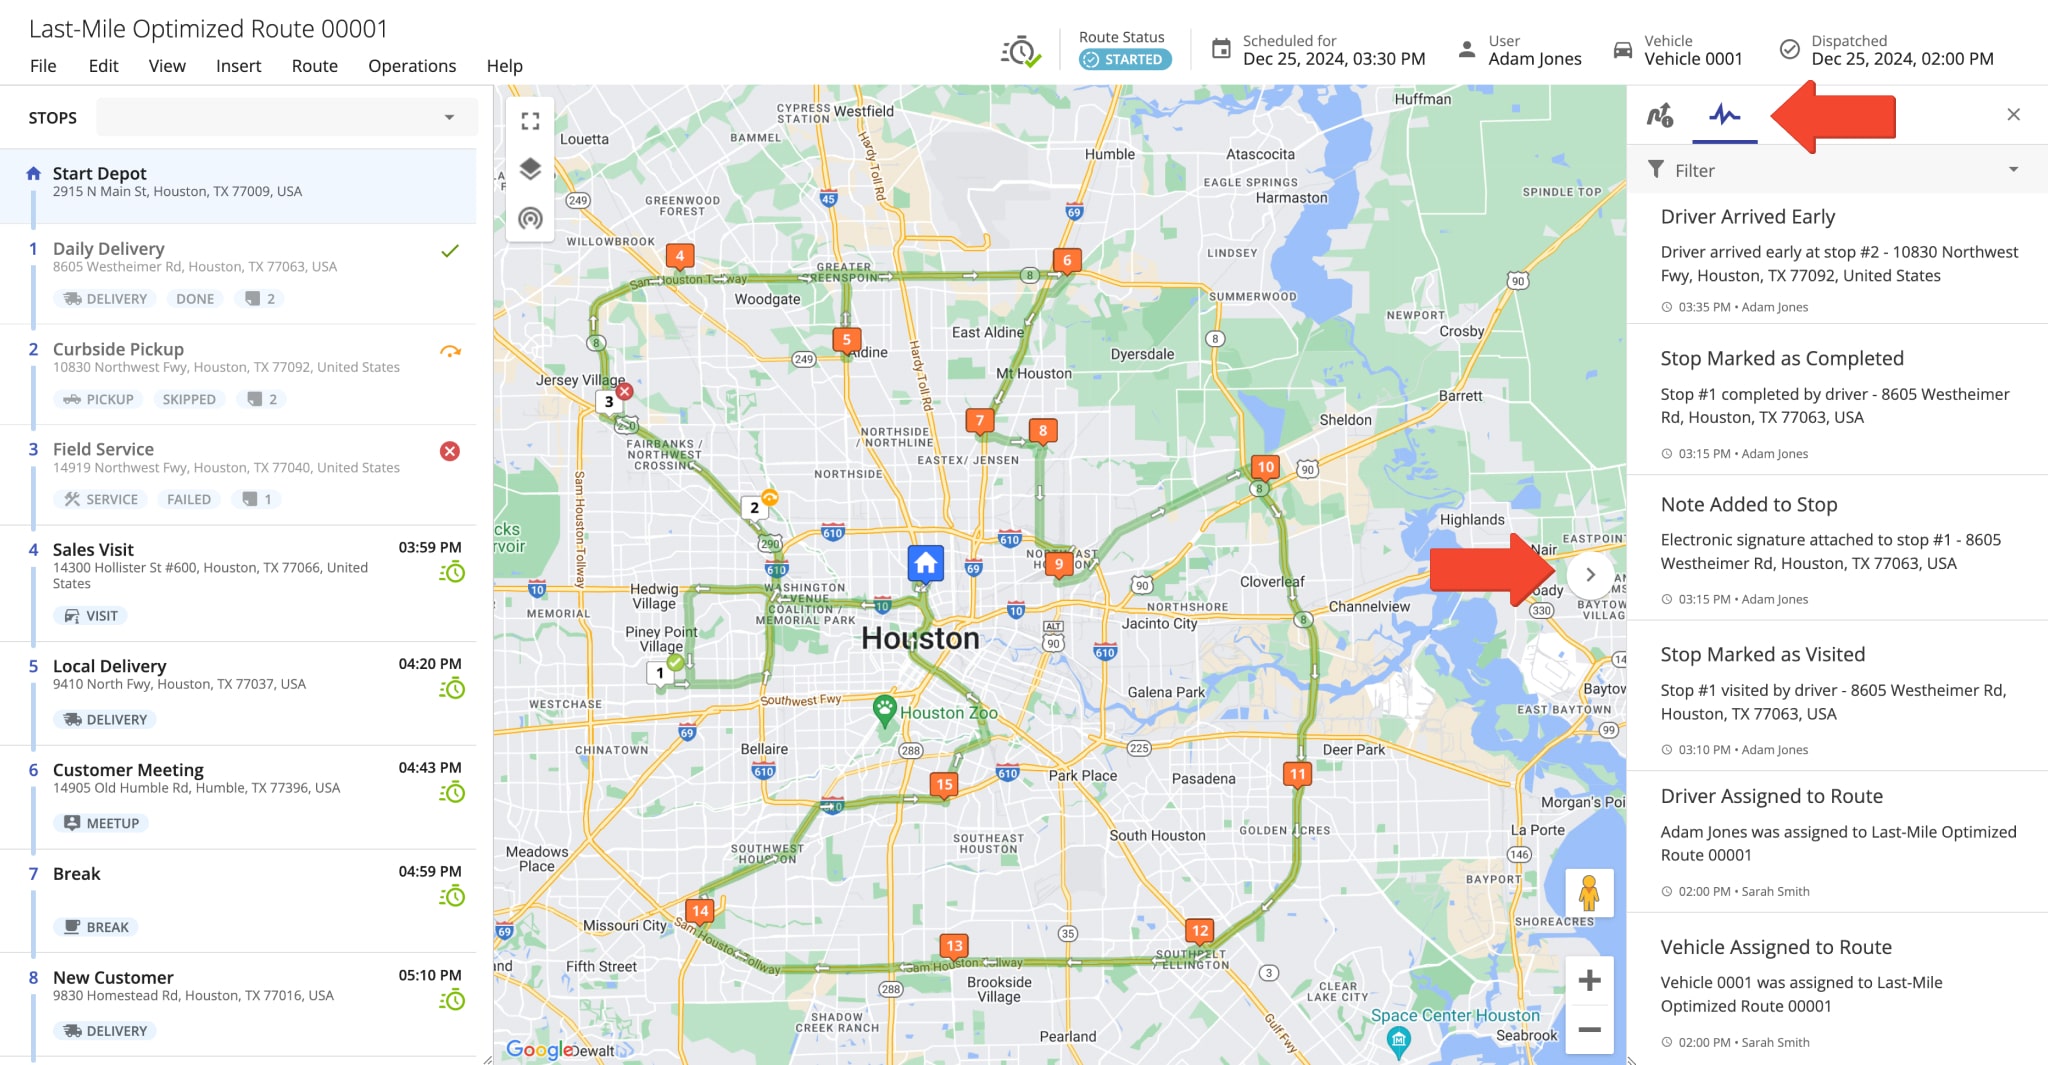 Activity Feed in Route Editor shows route events completed in real-time: added and removed stops, assigned driver and vehicle, attached proof of visit and delivery, added stop statuses, and more.